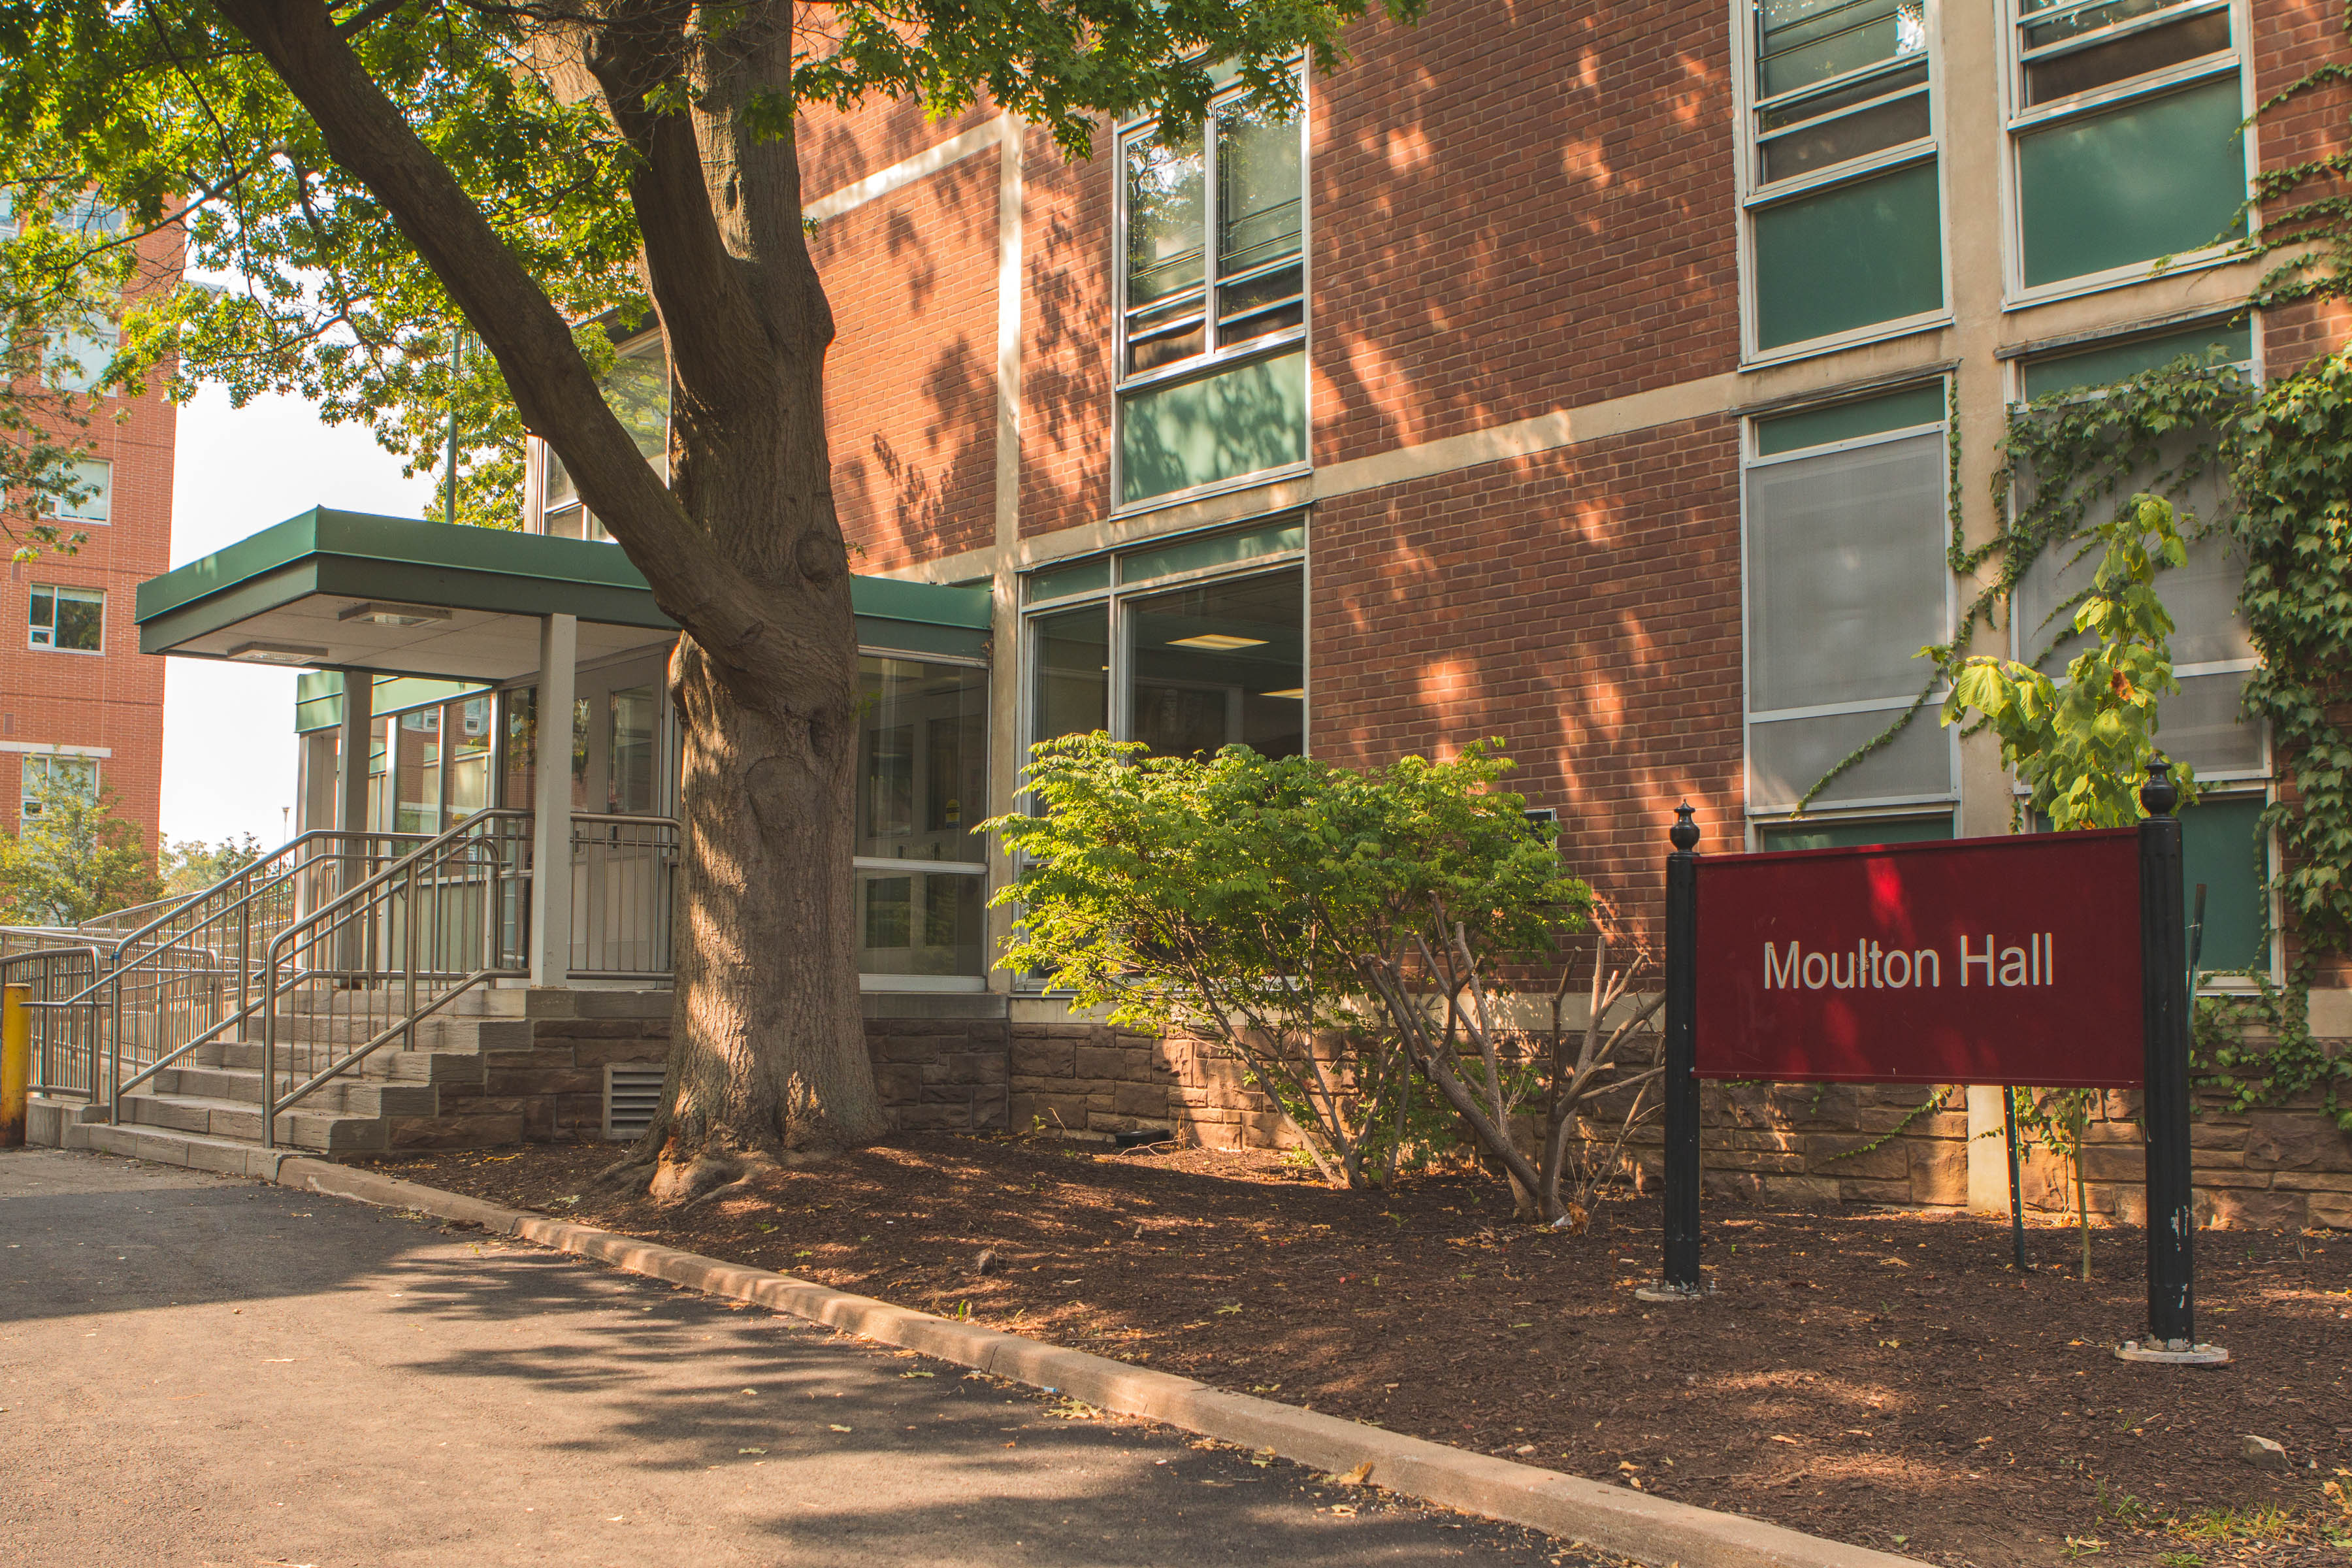 Moulton Hall is located in west quad at McMaster University